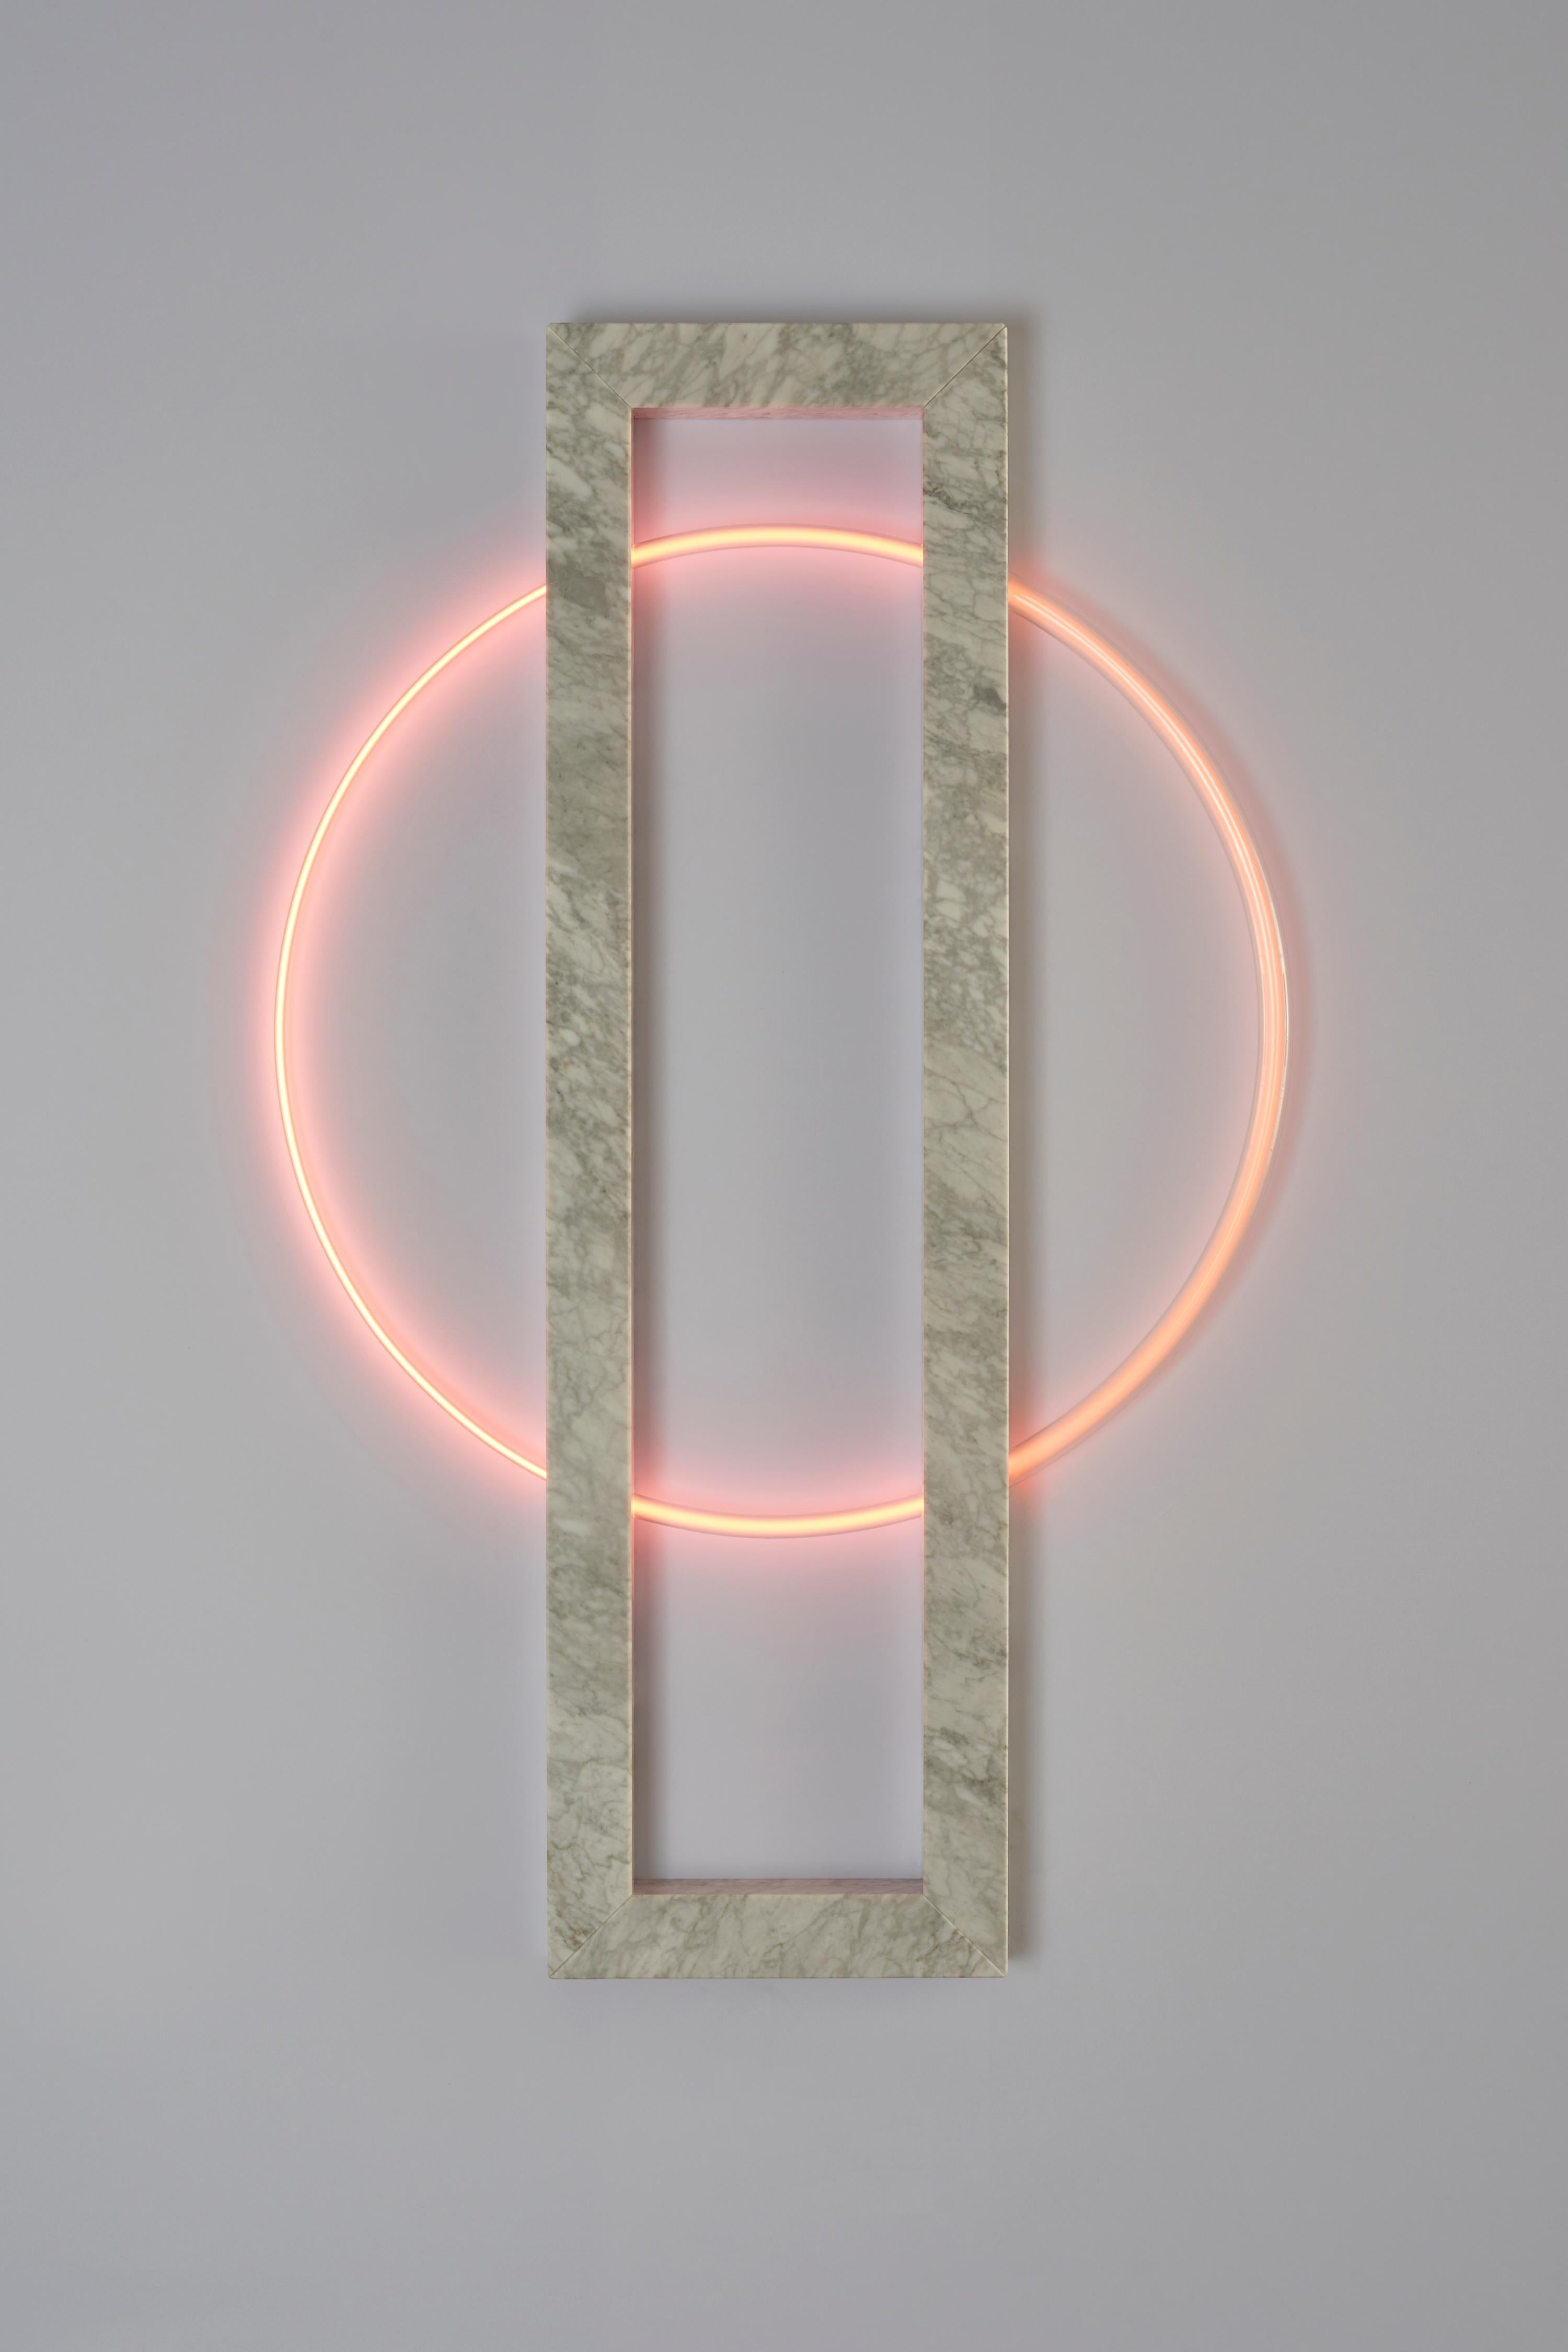 Dutch Pascal Smelik, Helios Sunset from Stone 'S', Wall Light Sculpture, 2021, AP